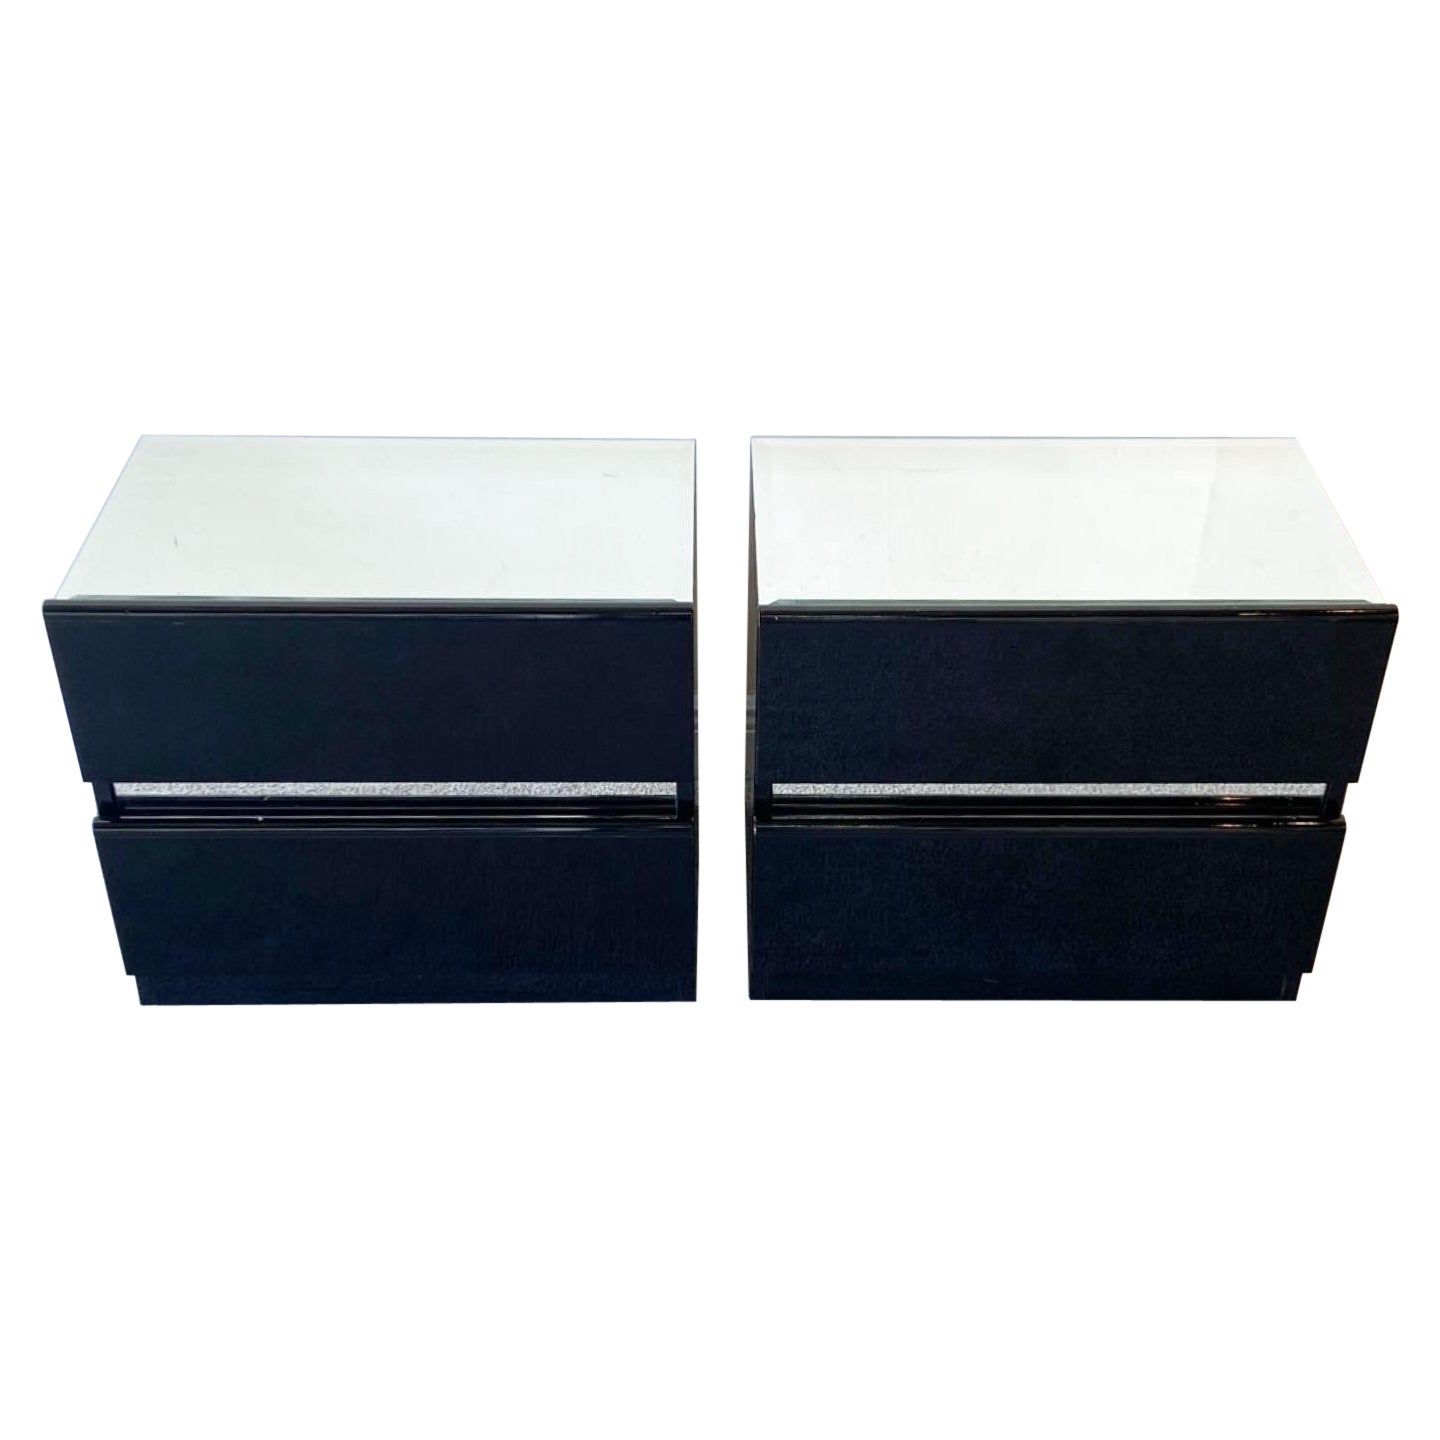 1980s Vintage Italian Mirrored Top Black Lacquered Nightstands - a Pair